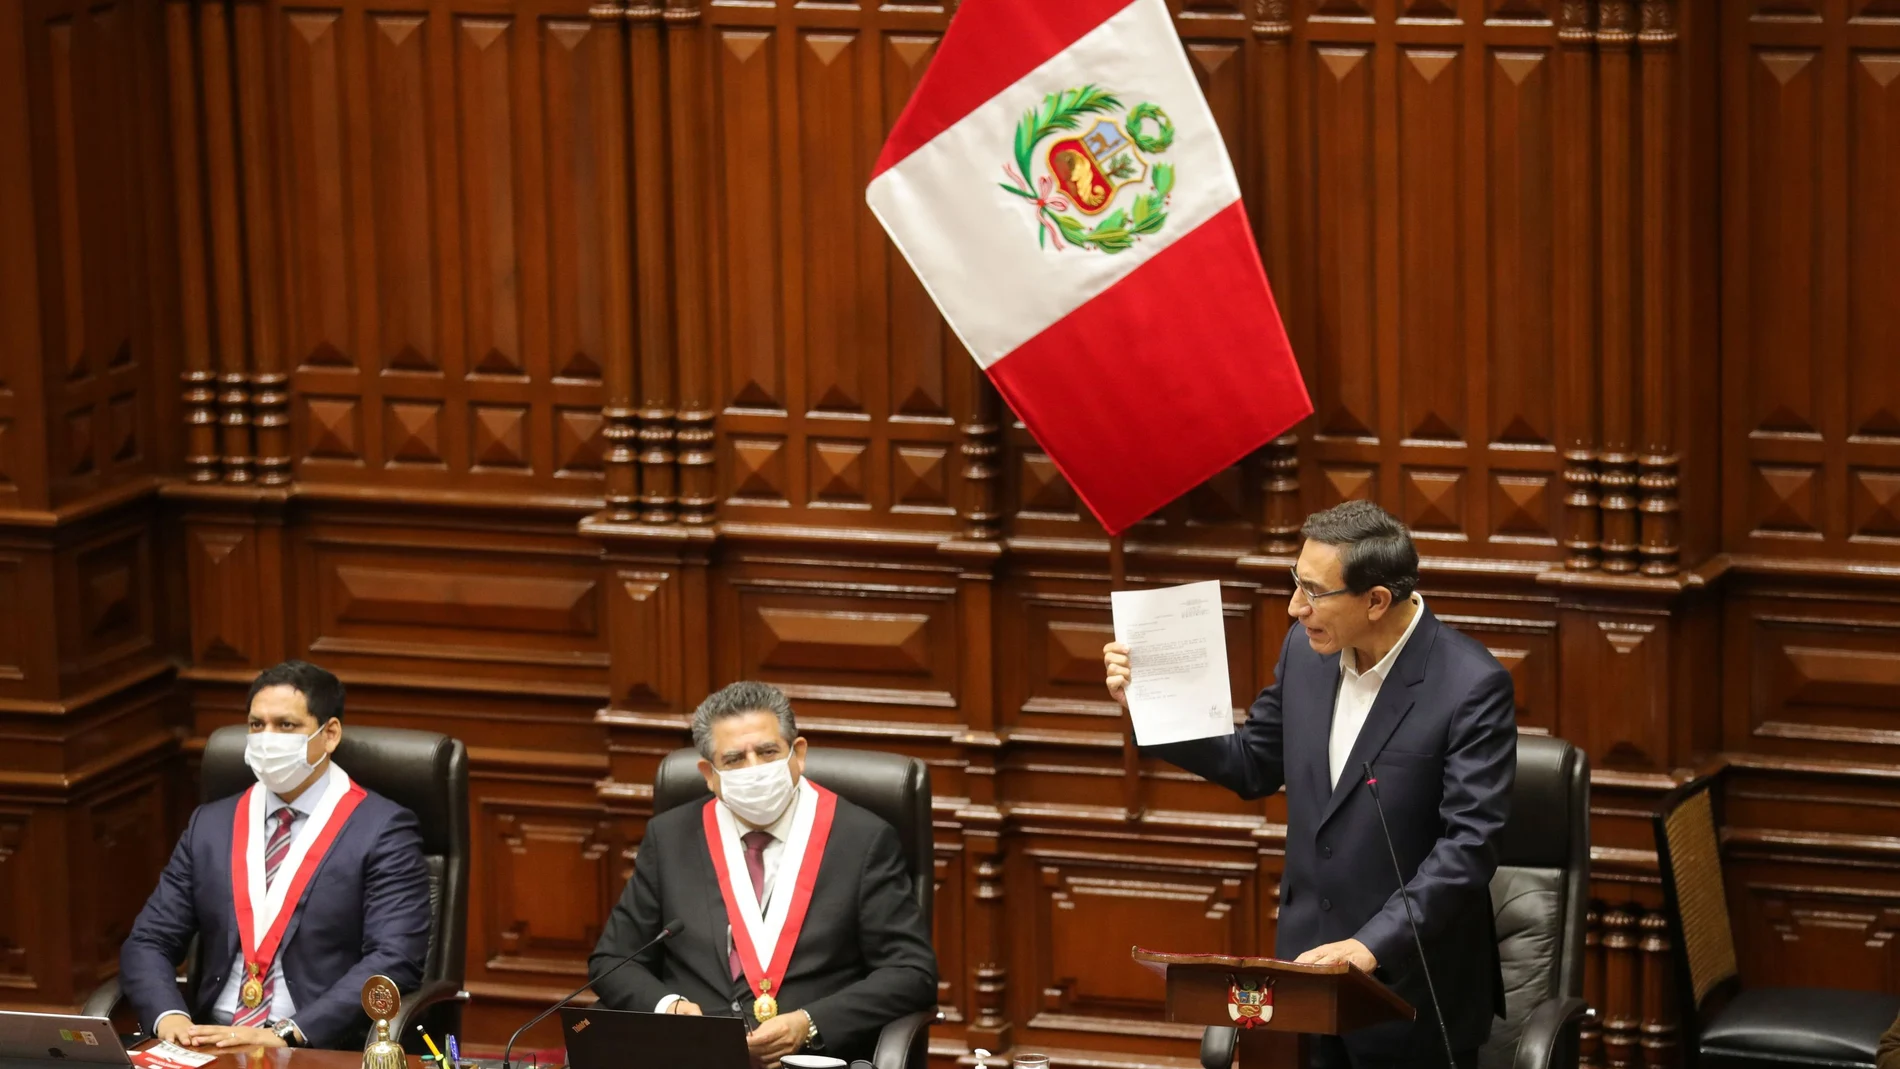 Peru's President Martin Vizcarra addresses Congress as lawmakers were set to vote over whether to oust Vizcarra after impeachment proceedings were launched last week, in Lima, Peru September 18, 2020. Peruvian Presidency/Handout via REUTERS ATTENTION EDITORS - THIS IMAGE WAS PROVIDED BY A THIRD PARTY. NO RESALES. NO ARCHIVE